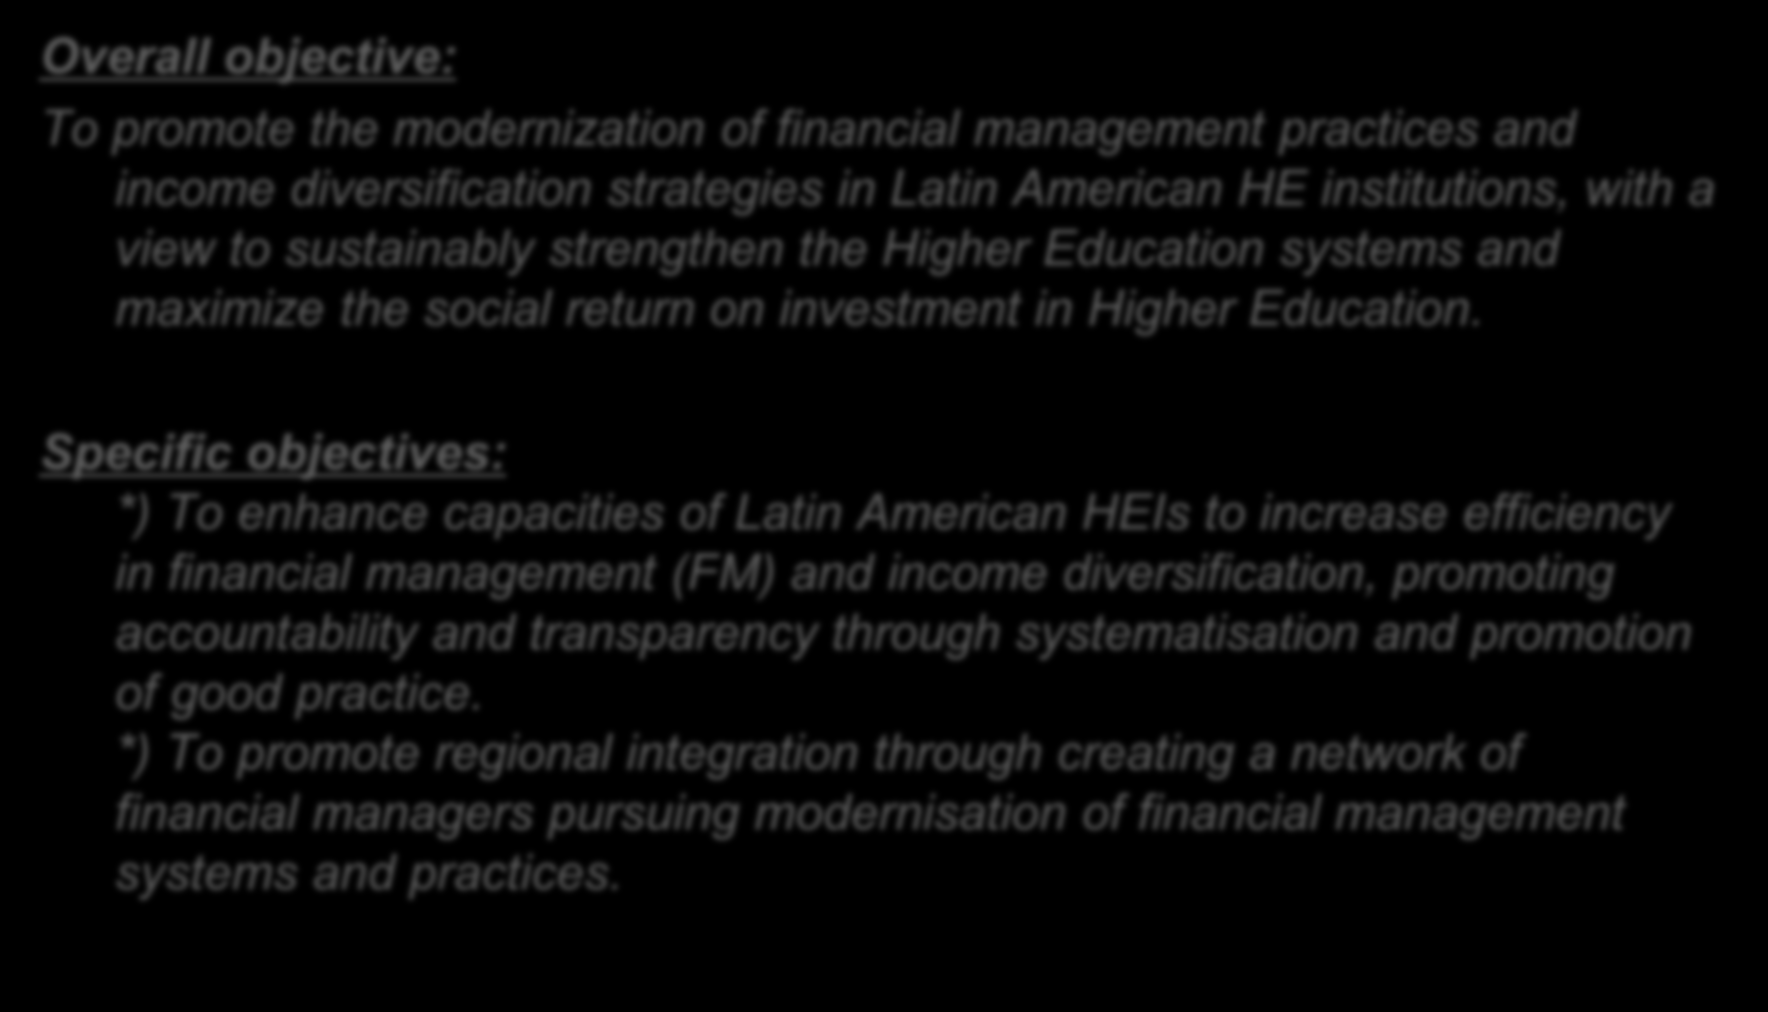 OBJETIVO GENERAL OBJETIVOS ESPECÍFICOS EJEMPLO Overall objective: To promote the modernization of financial management practices and income diversification strategies in Latin American HE